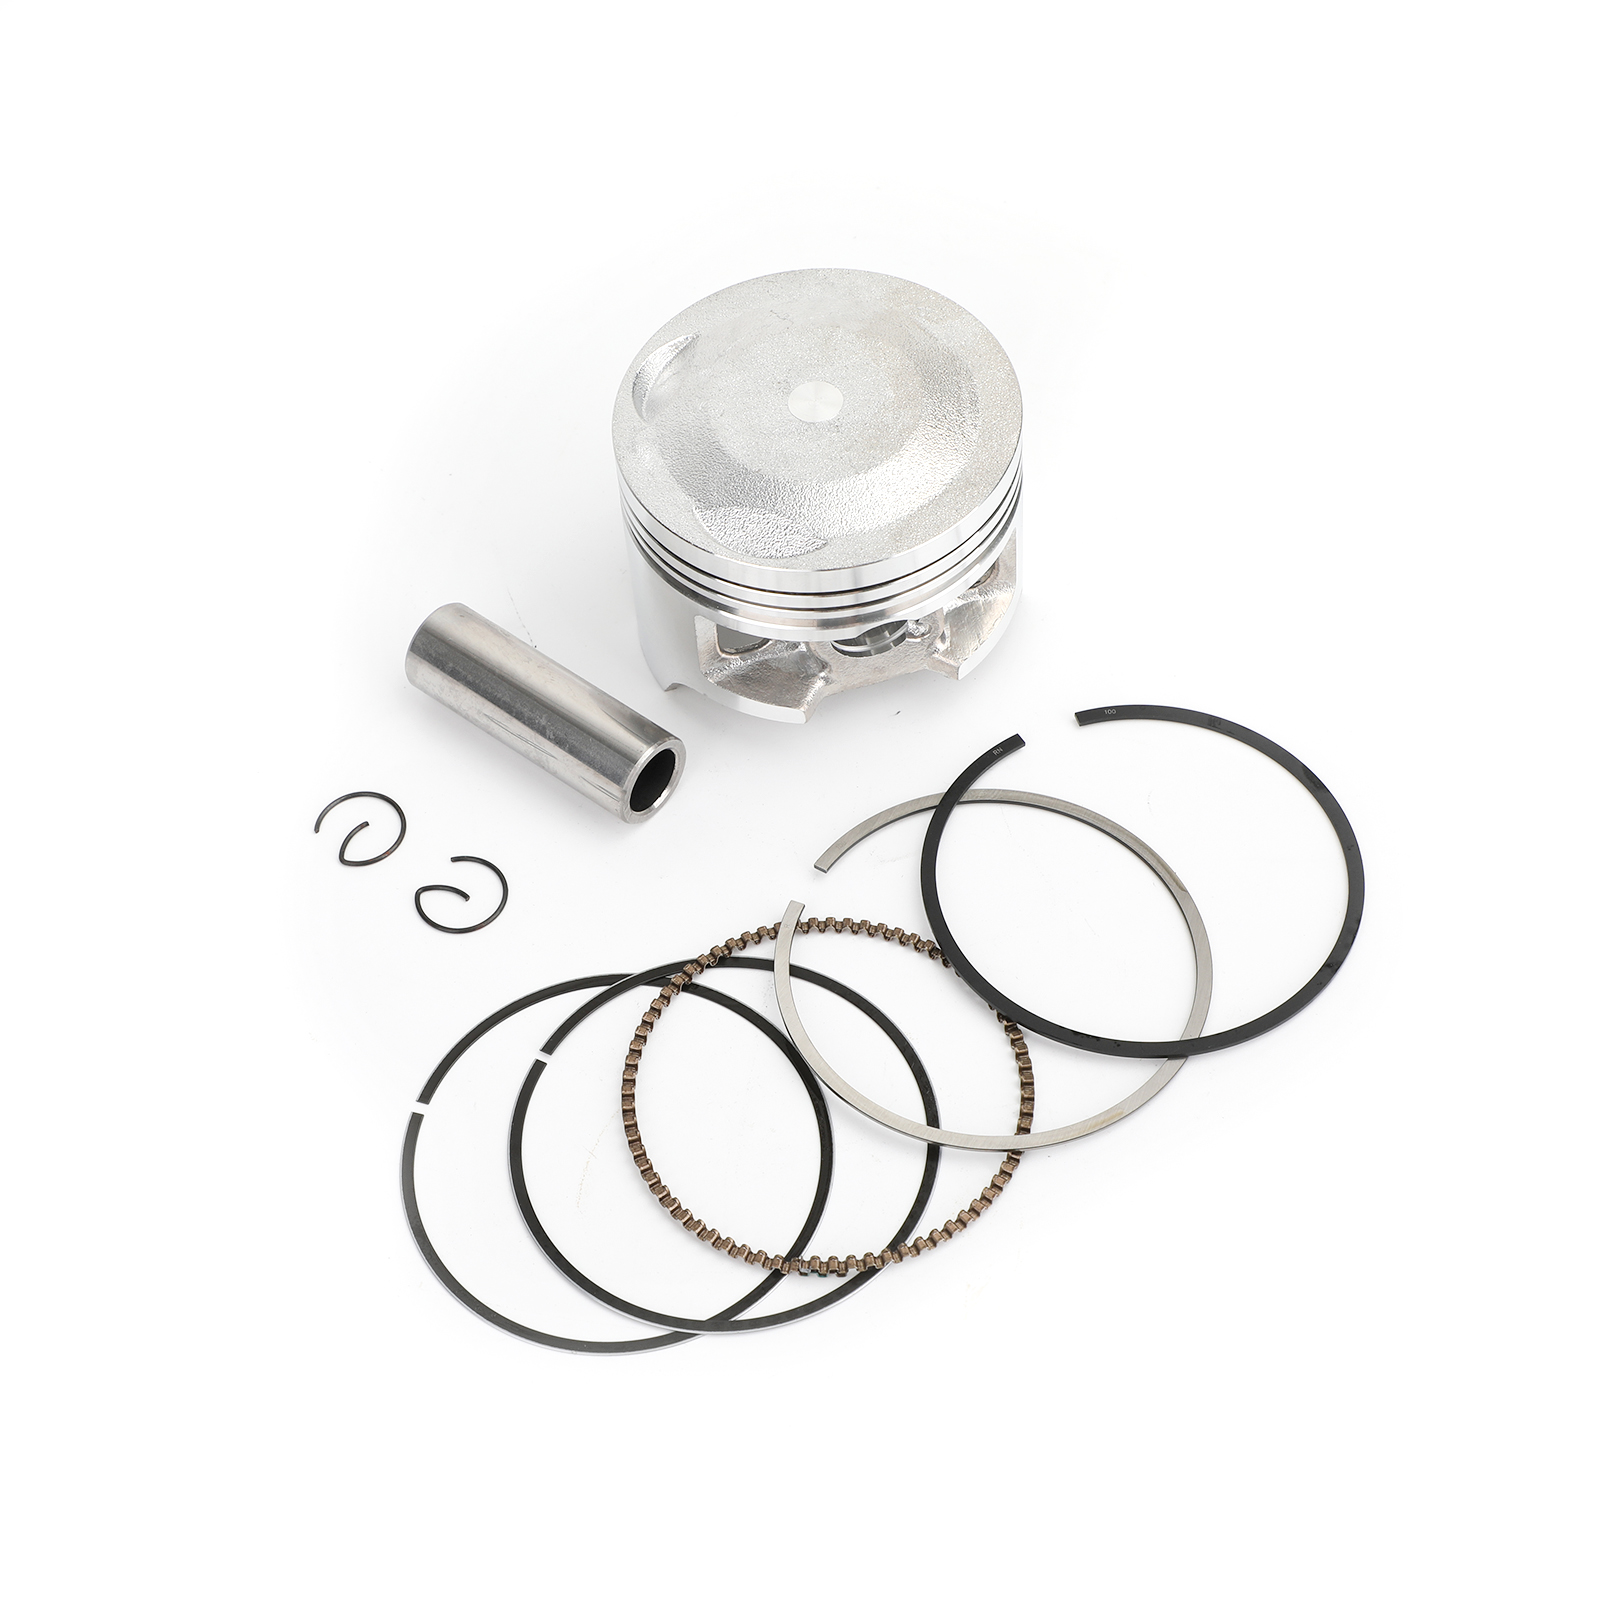 Areyourshop For Honda XR250R 1996-2004 XR 250 R Engine Piston Ring Kit 73mm STD 13101-KCE-670 motorcycle covers Parts